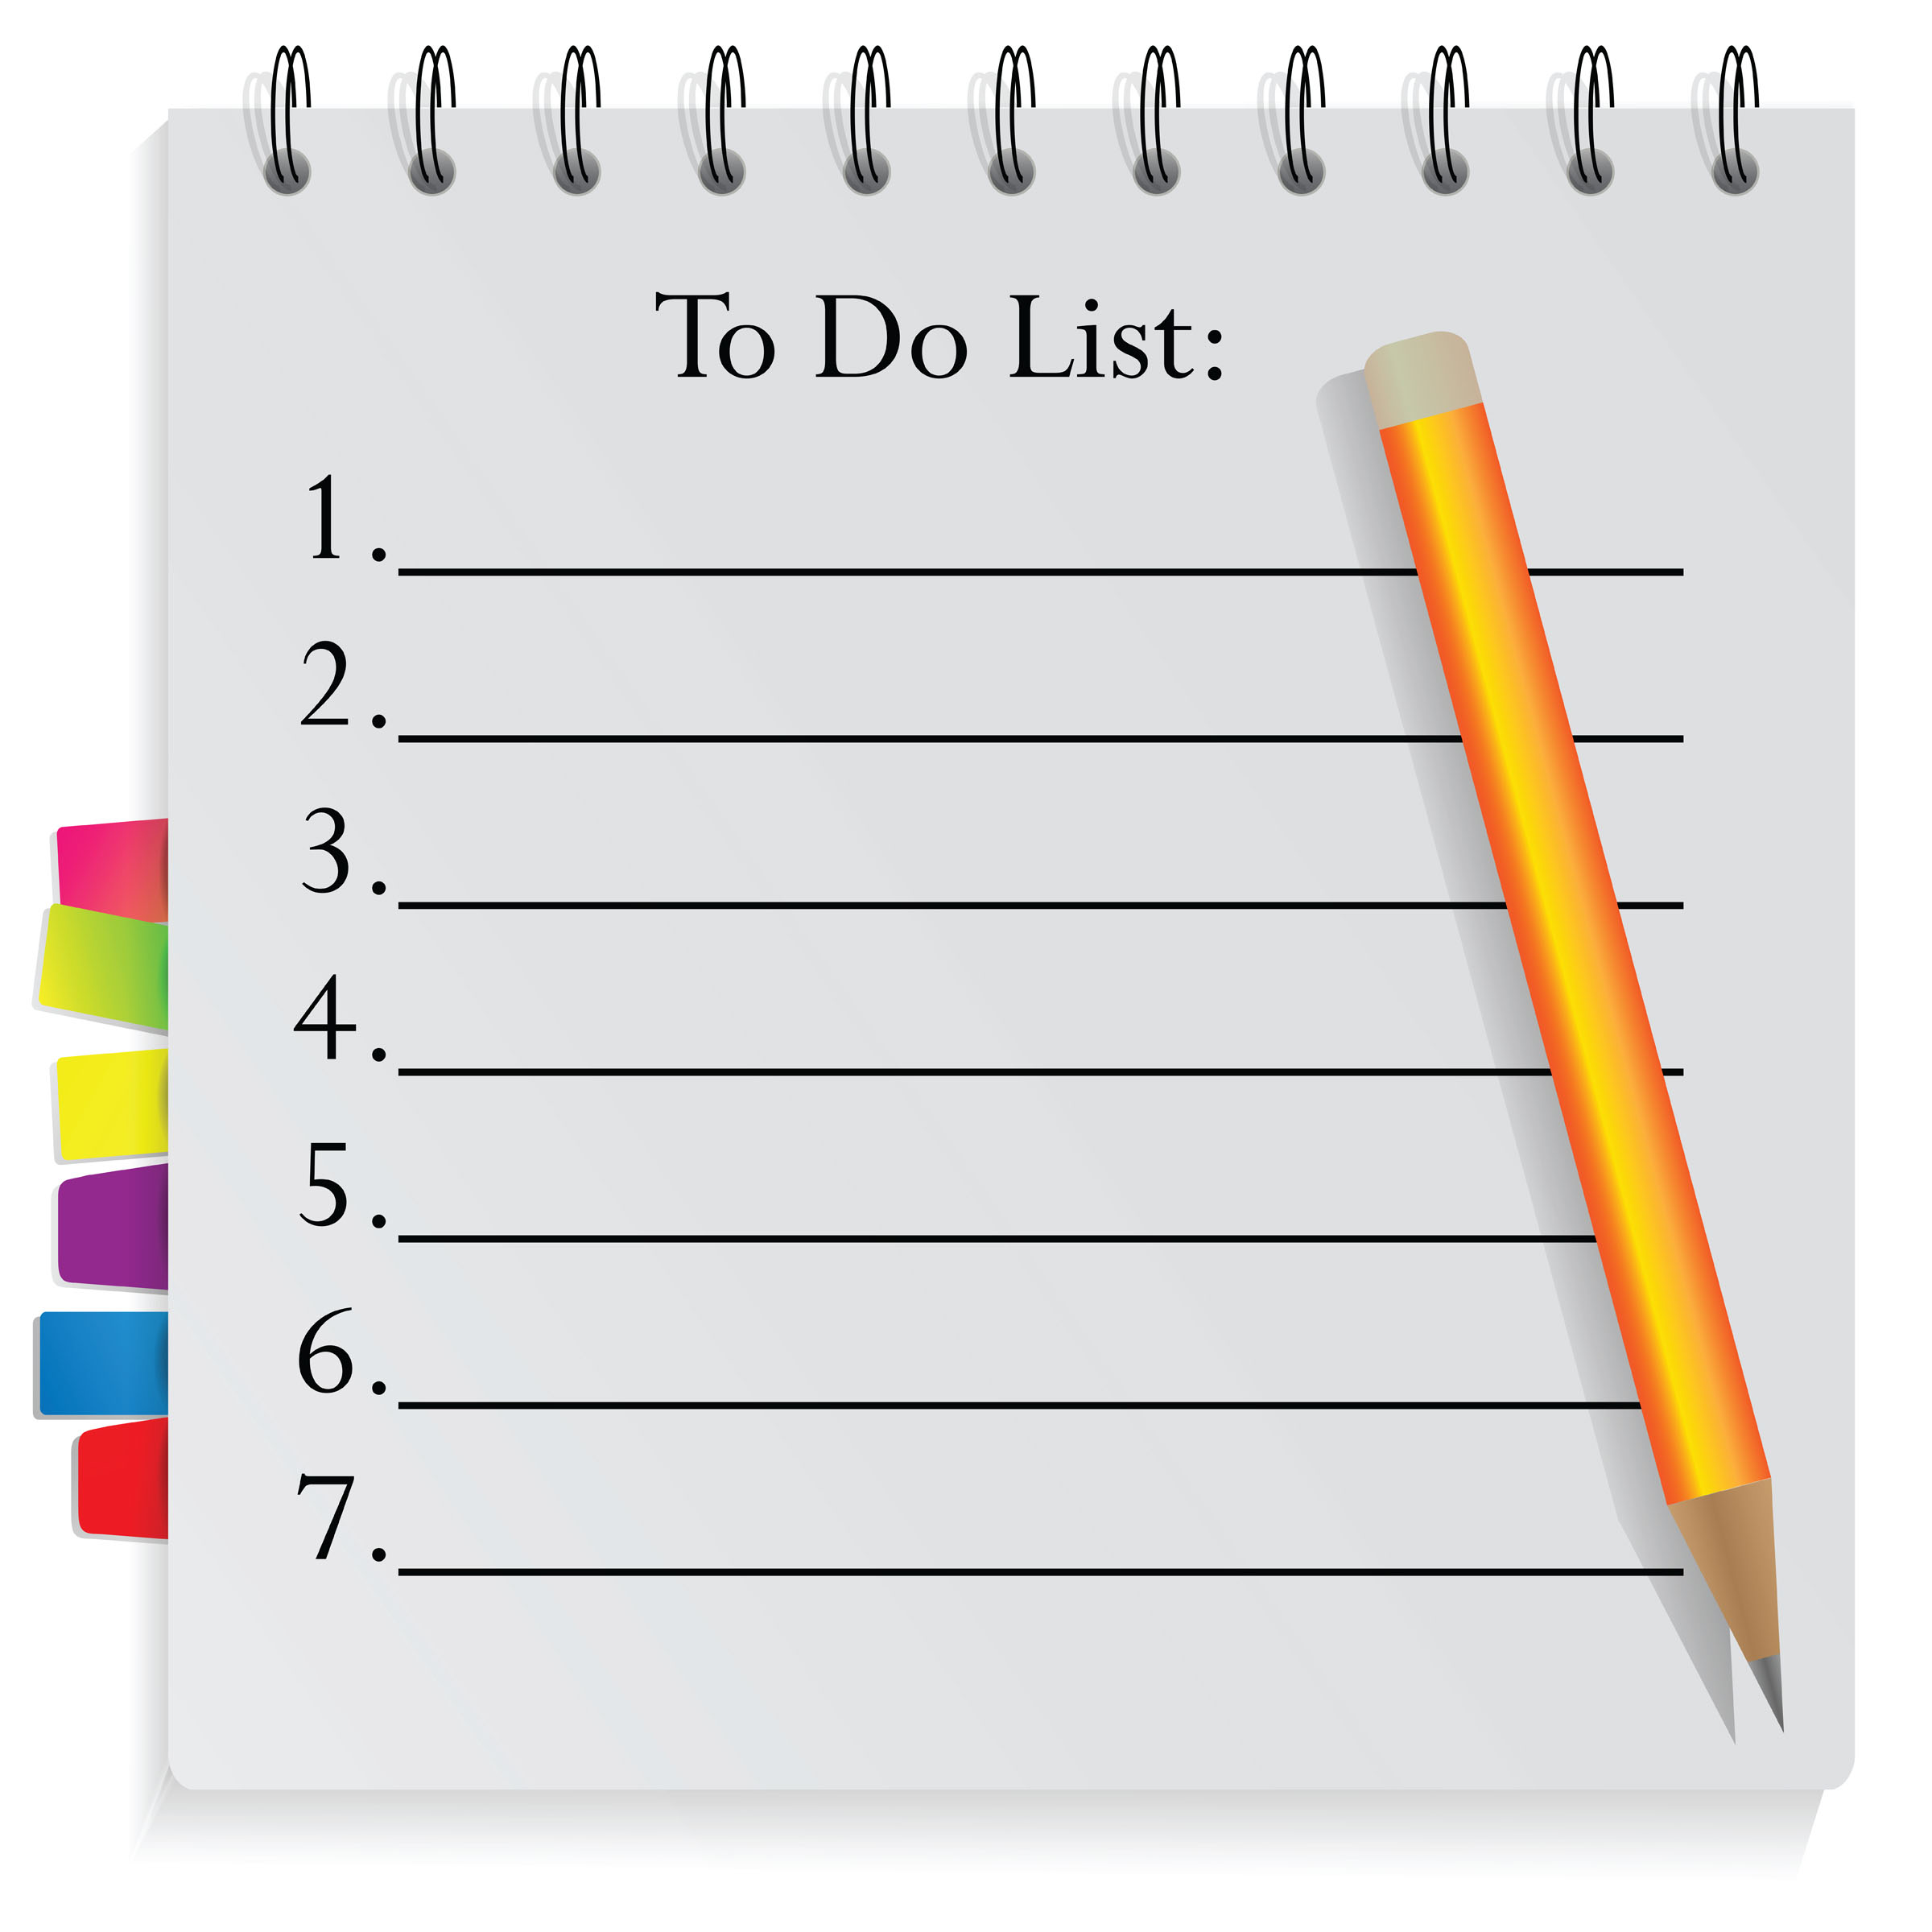 Today’s To-Do’s  and Other Potentially Unnecessary Things